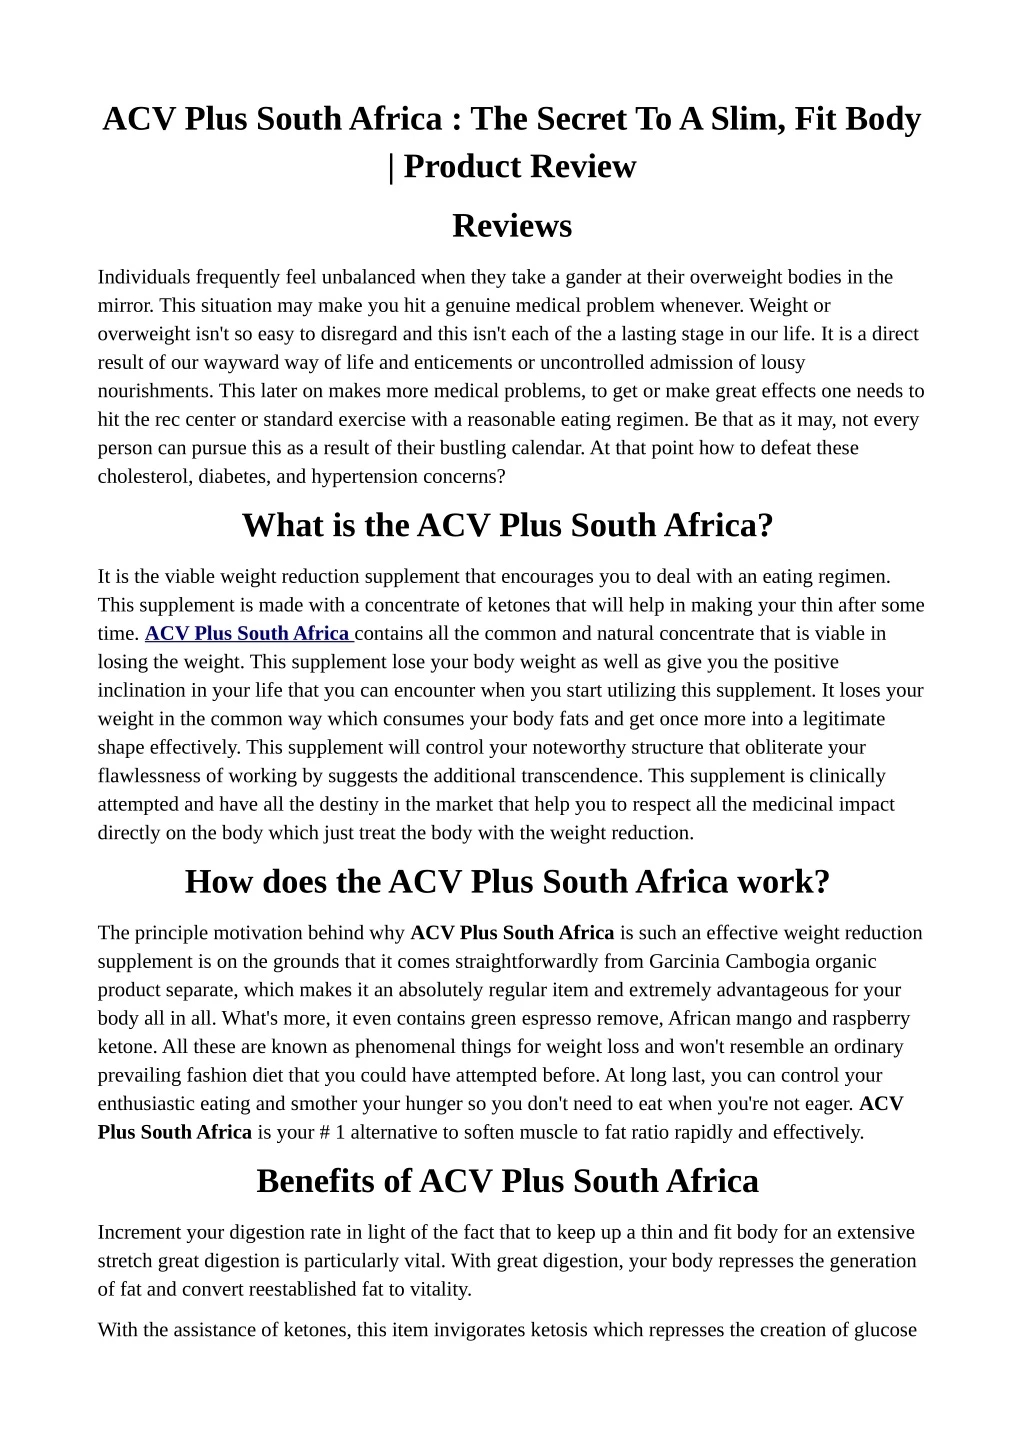 acv plus south africa the secret to a slim